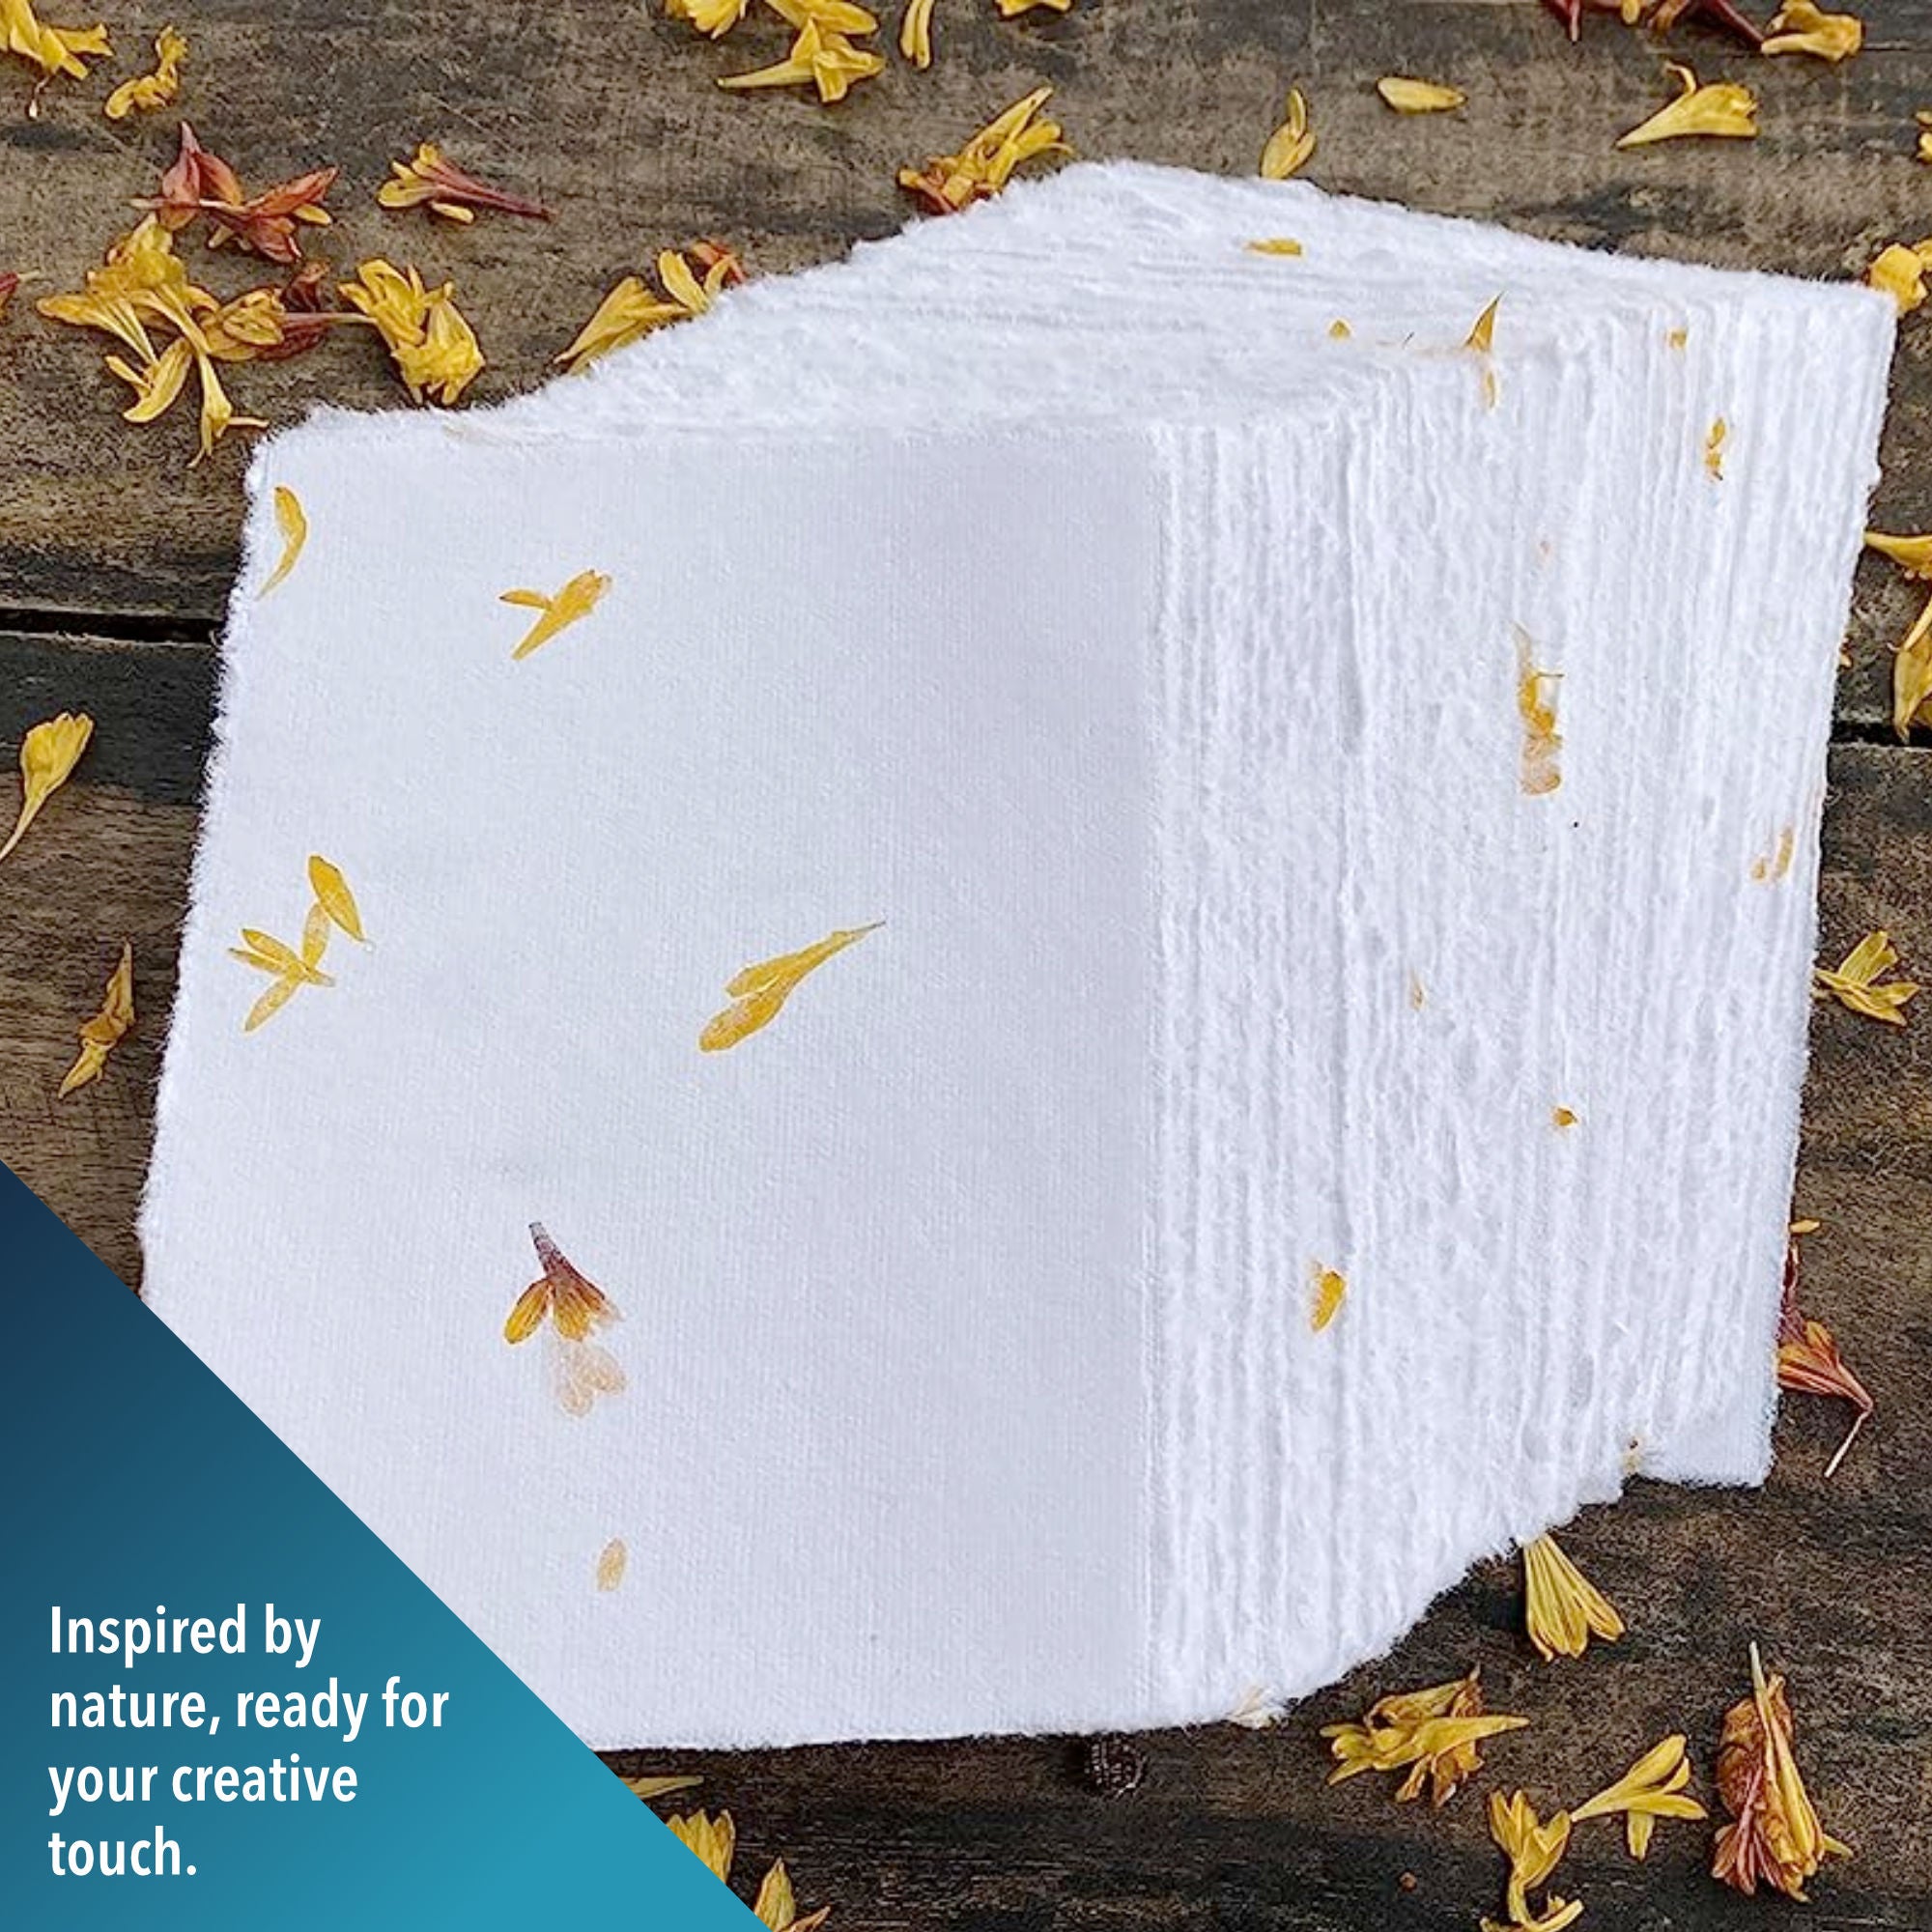 Wanderings Handmade White Deckle Edge Blank Paper Cards - only 3.5x2” -  Pack of 50 - Watercolor Mixed Media - Ideal for Arts & Crafts, Gift Tags